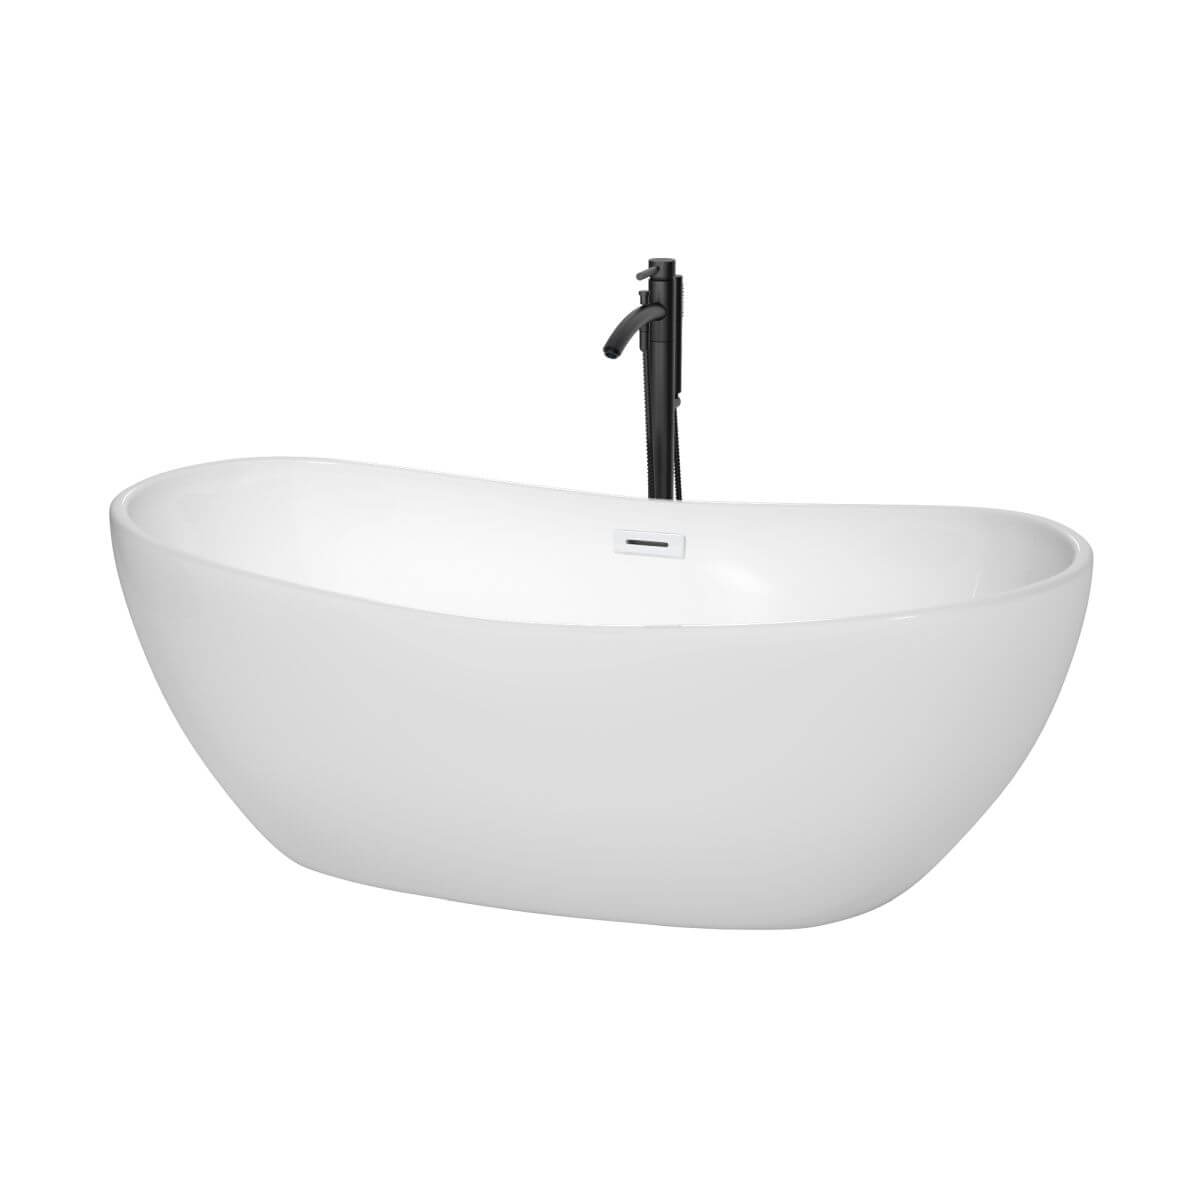 Wyndham Collection Rebecca 65 inch Freestanding Bathtub in White with Shiny White Trim and Floor Mounted Faucet in Matte Black - WCOBT101465SWATPBK